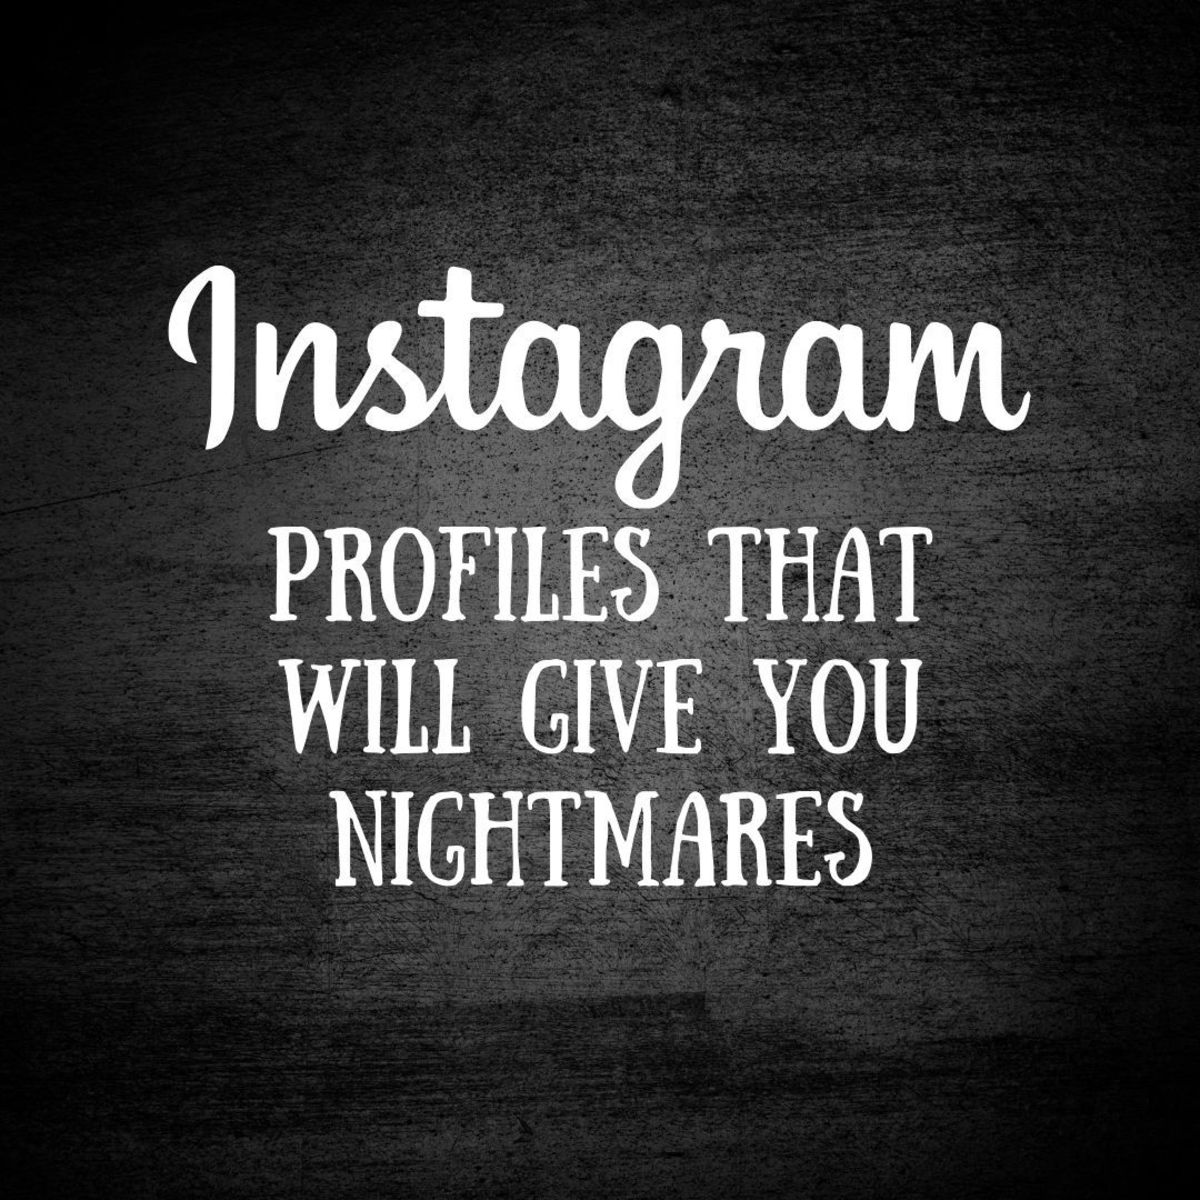 The creepiest, scariest Instagram accounts out there